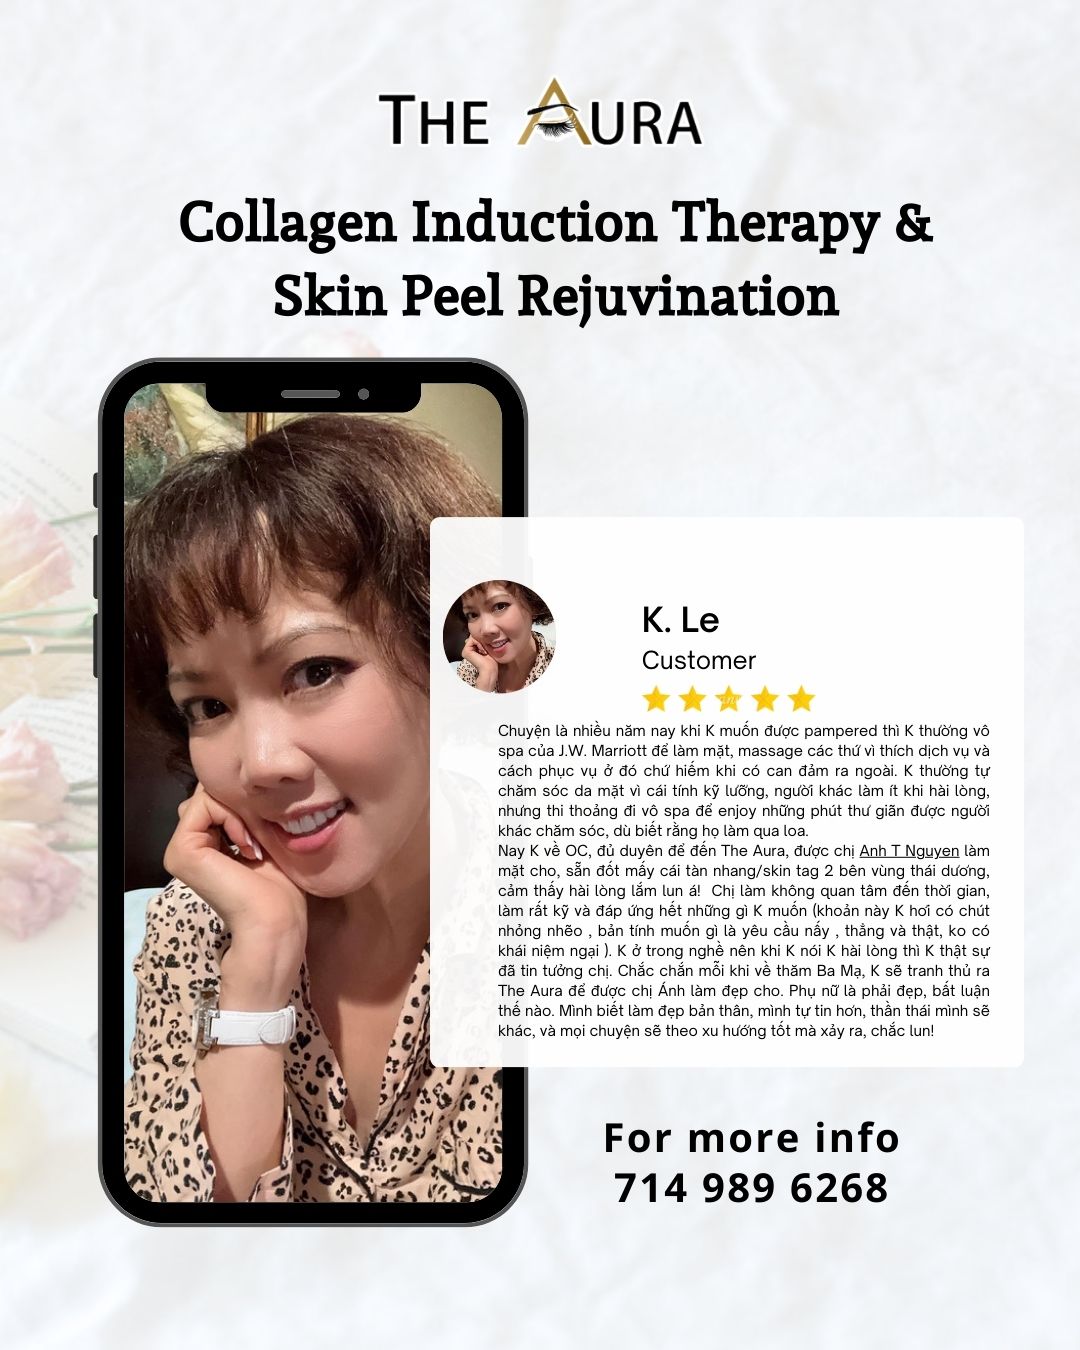 How happy client feels after just One-Collagen-Induction Therapy Session!